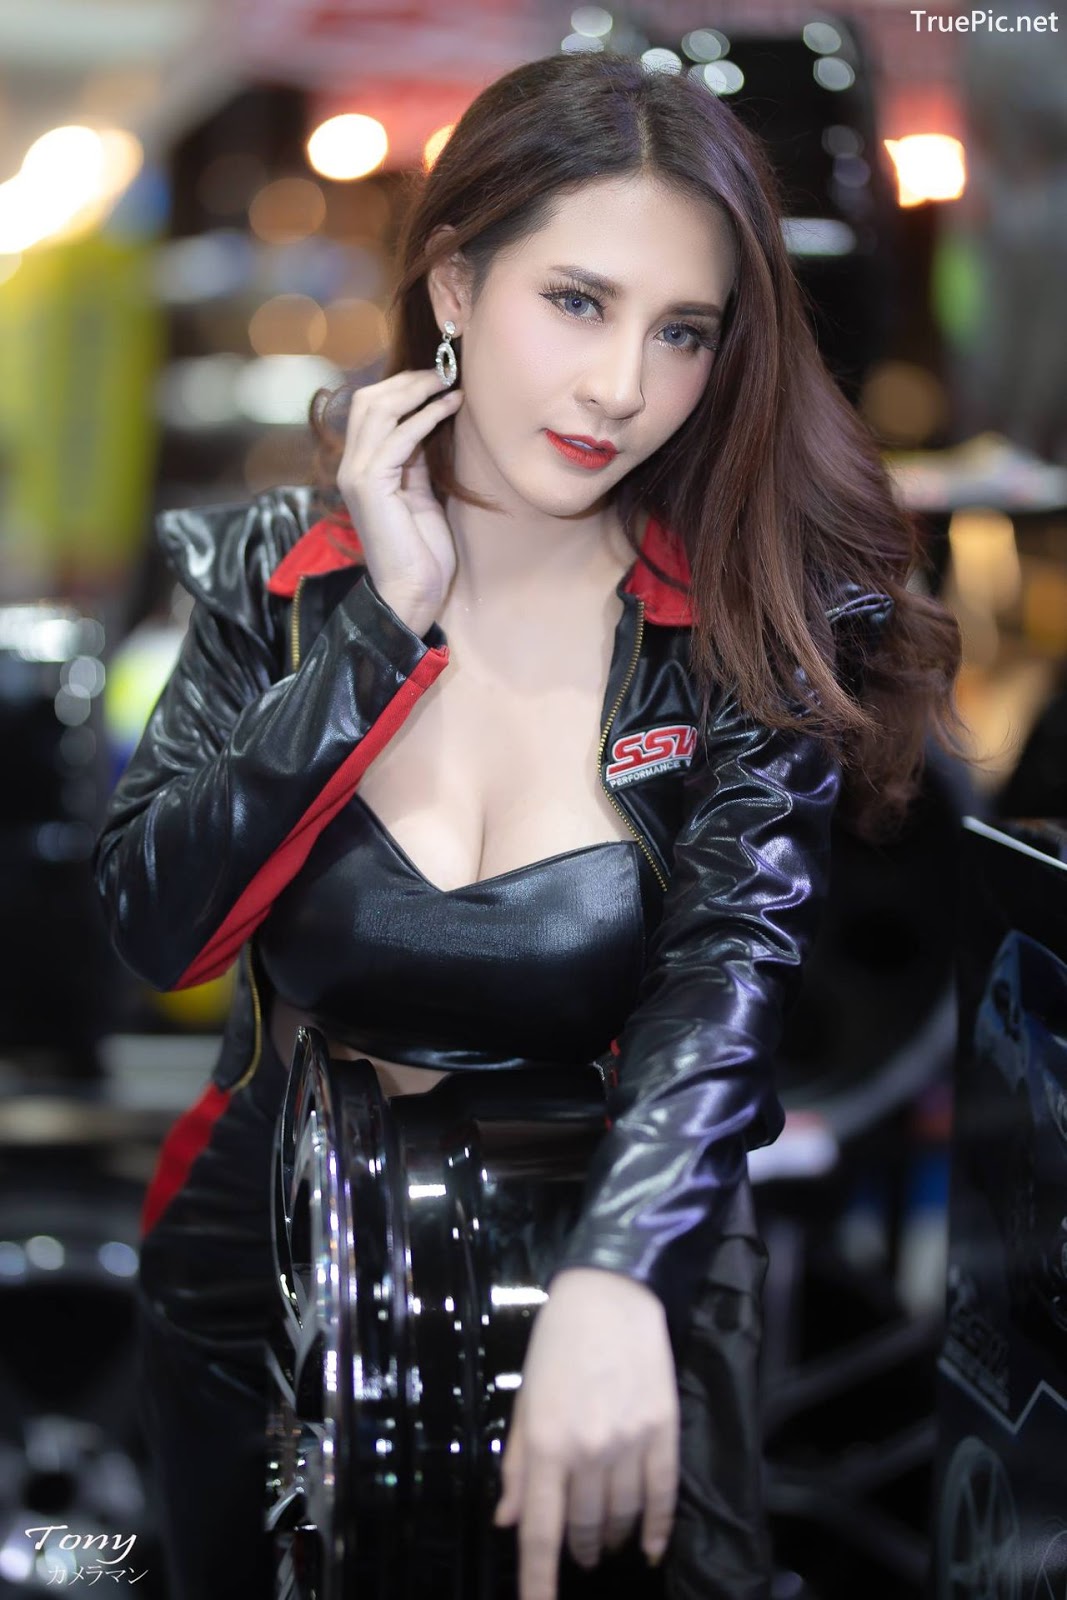 Image-Thailand-Hot-Model-Thai-Racing-Girl-At-Motor-Expo-2018-TruePic.net- Picture-85